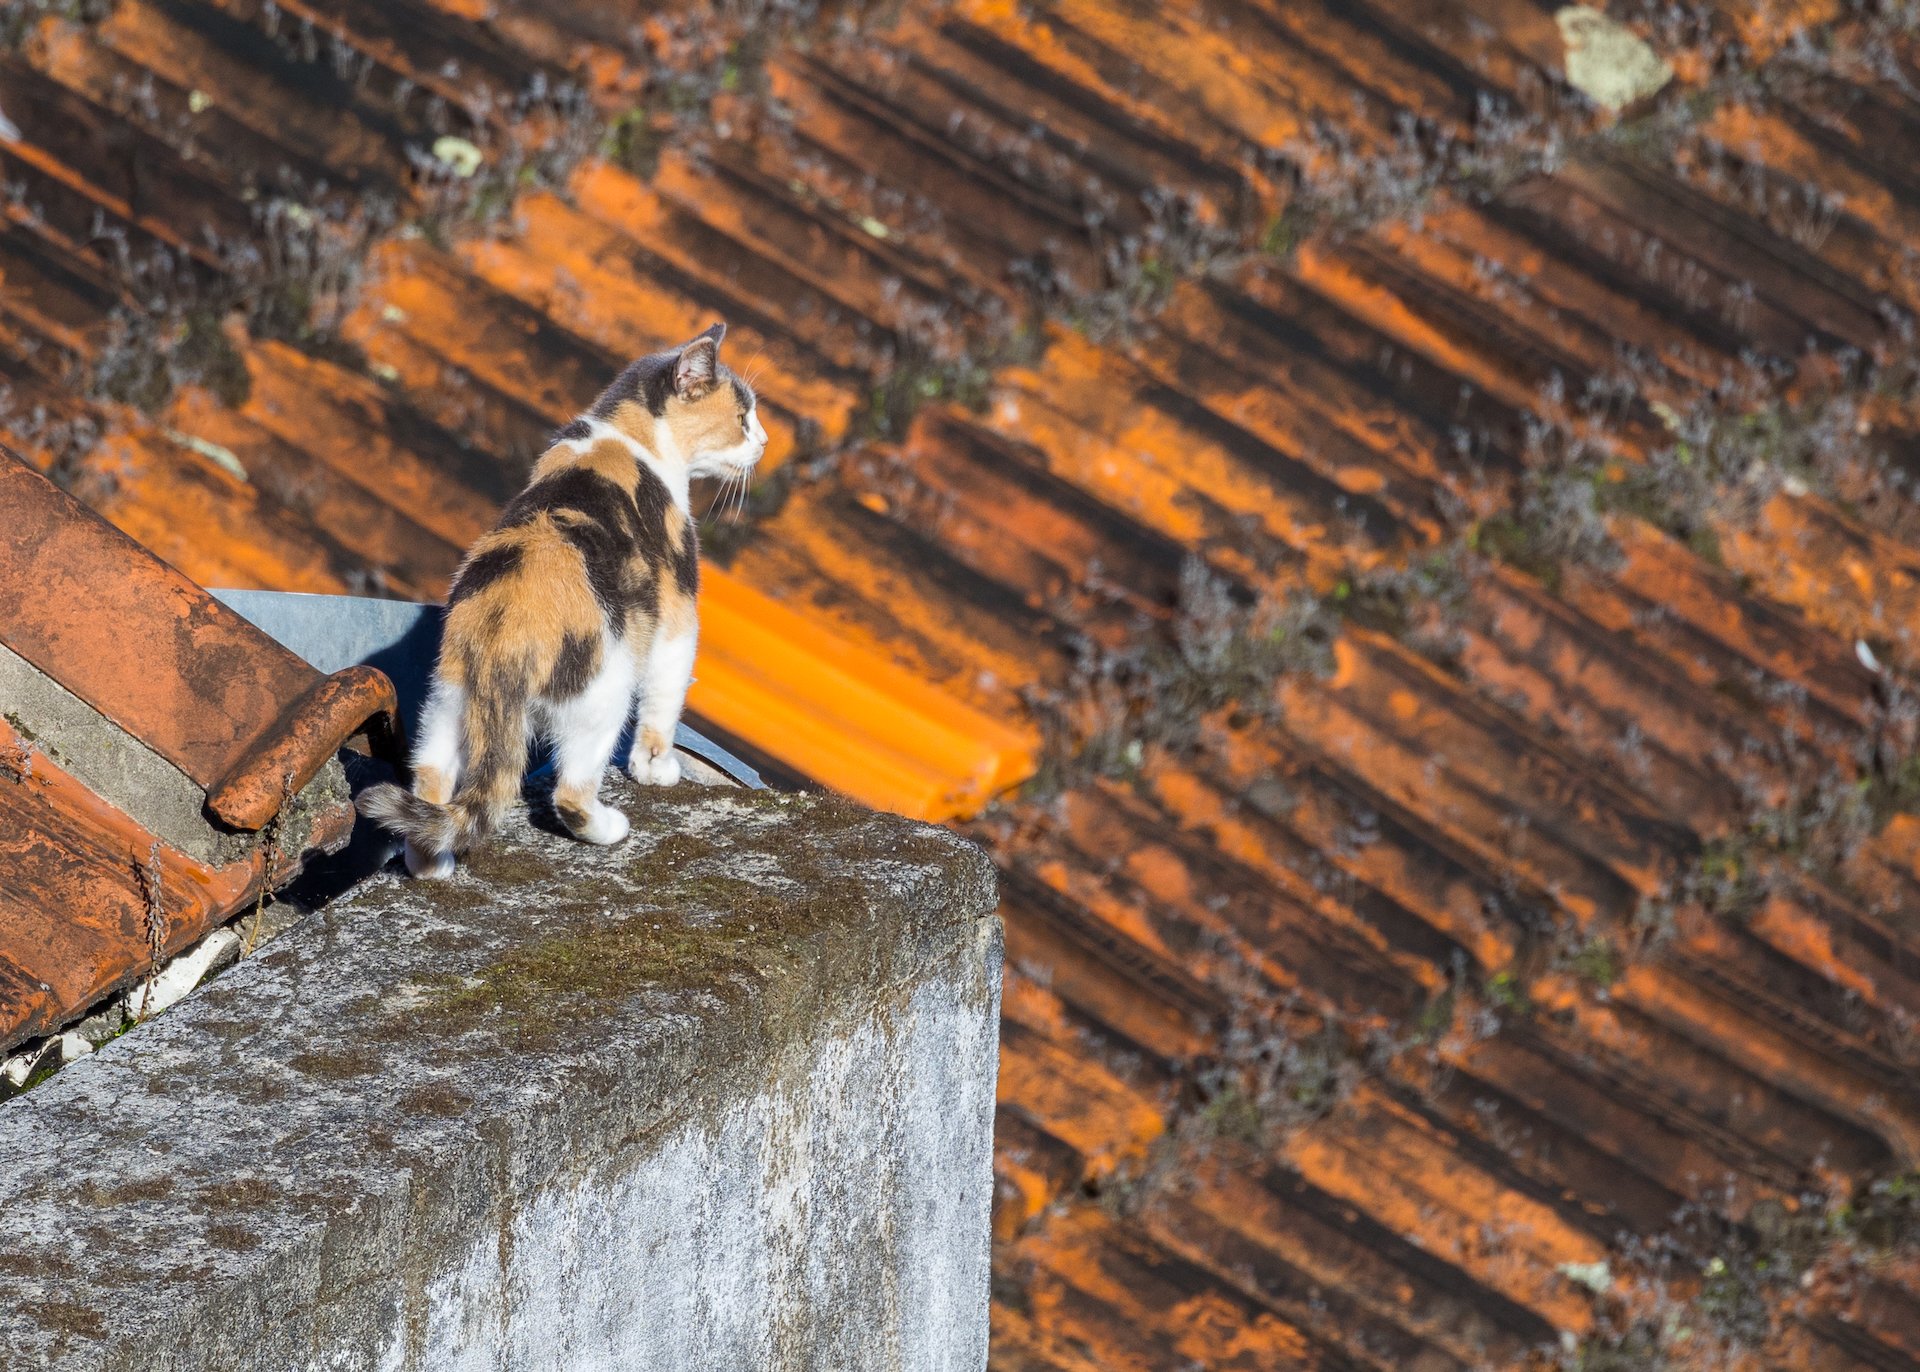  The roofs of the buildings underneath us had an entire ecosystem playing out on it. There were cats everywhere… 